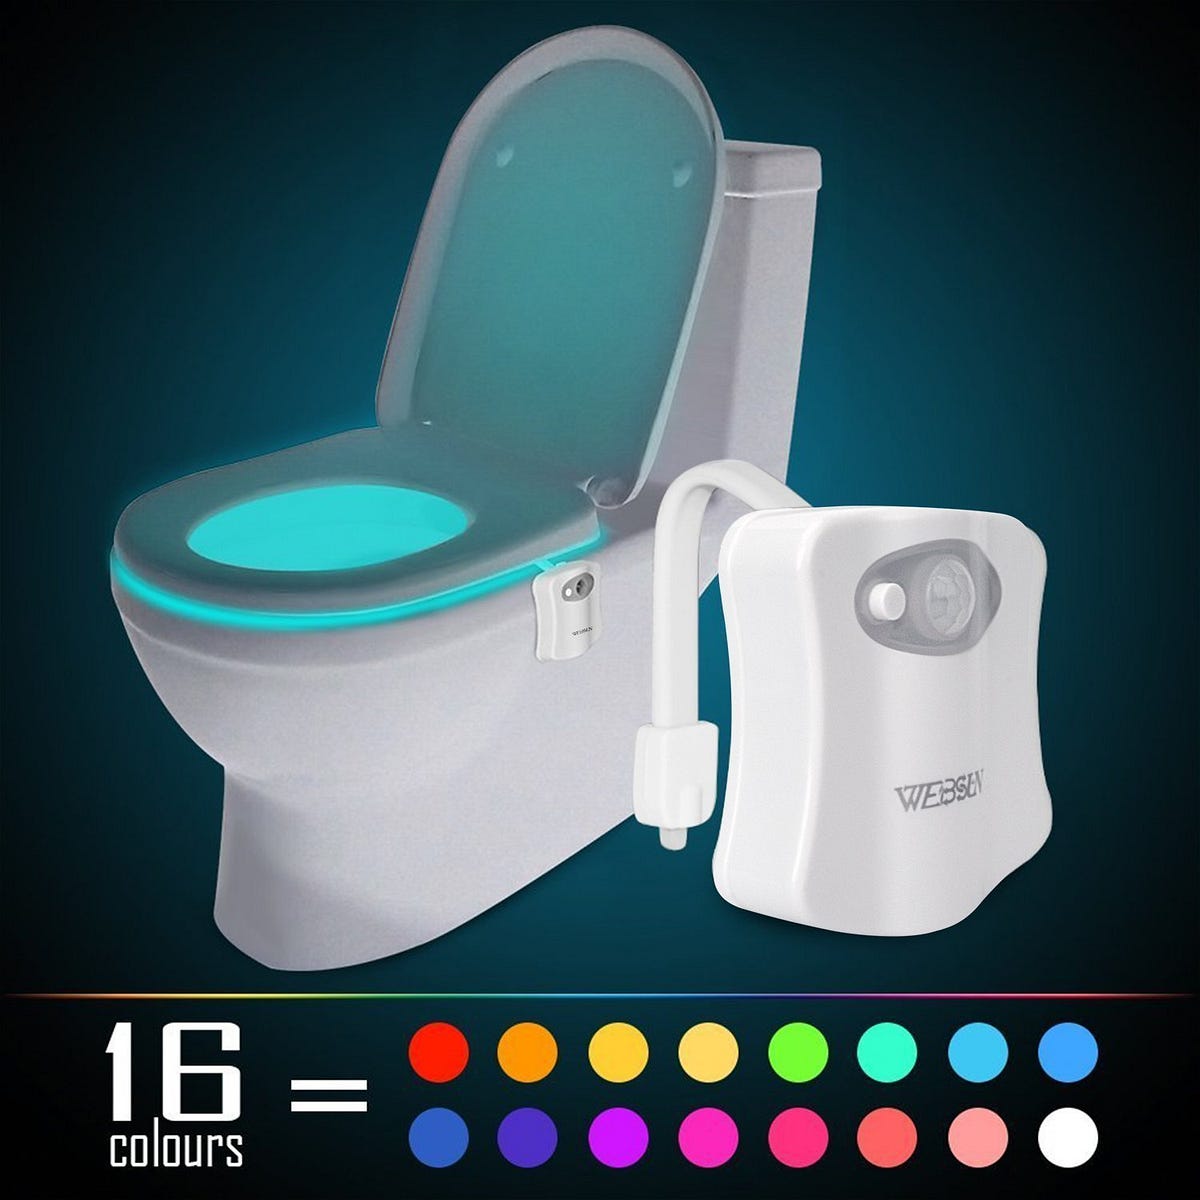 A Glow in the Dark Toilet Seat!?. It's the small things in life